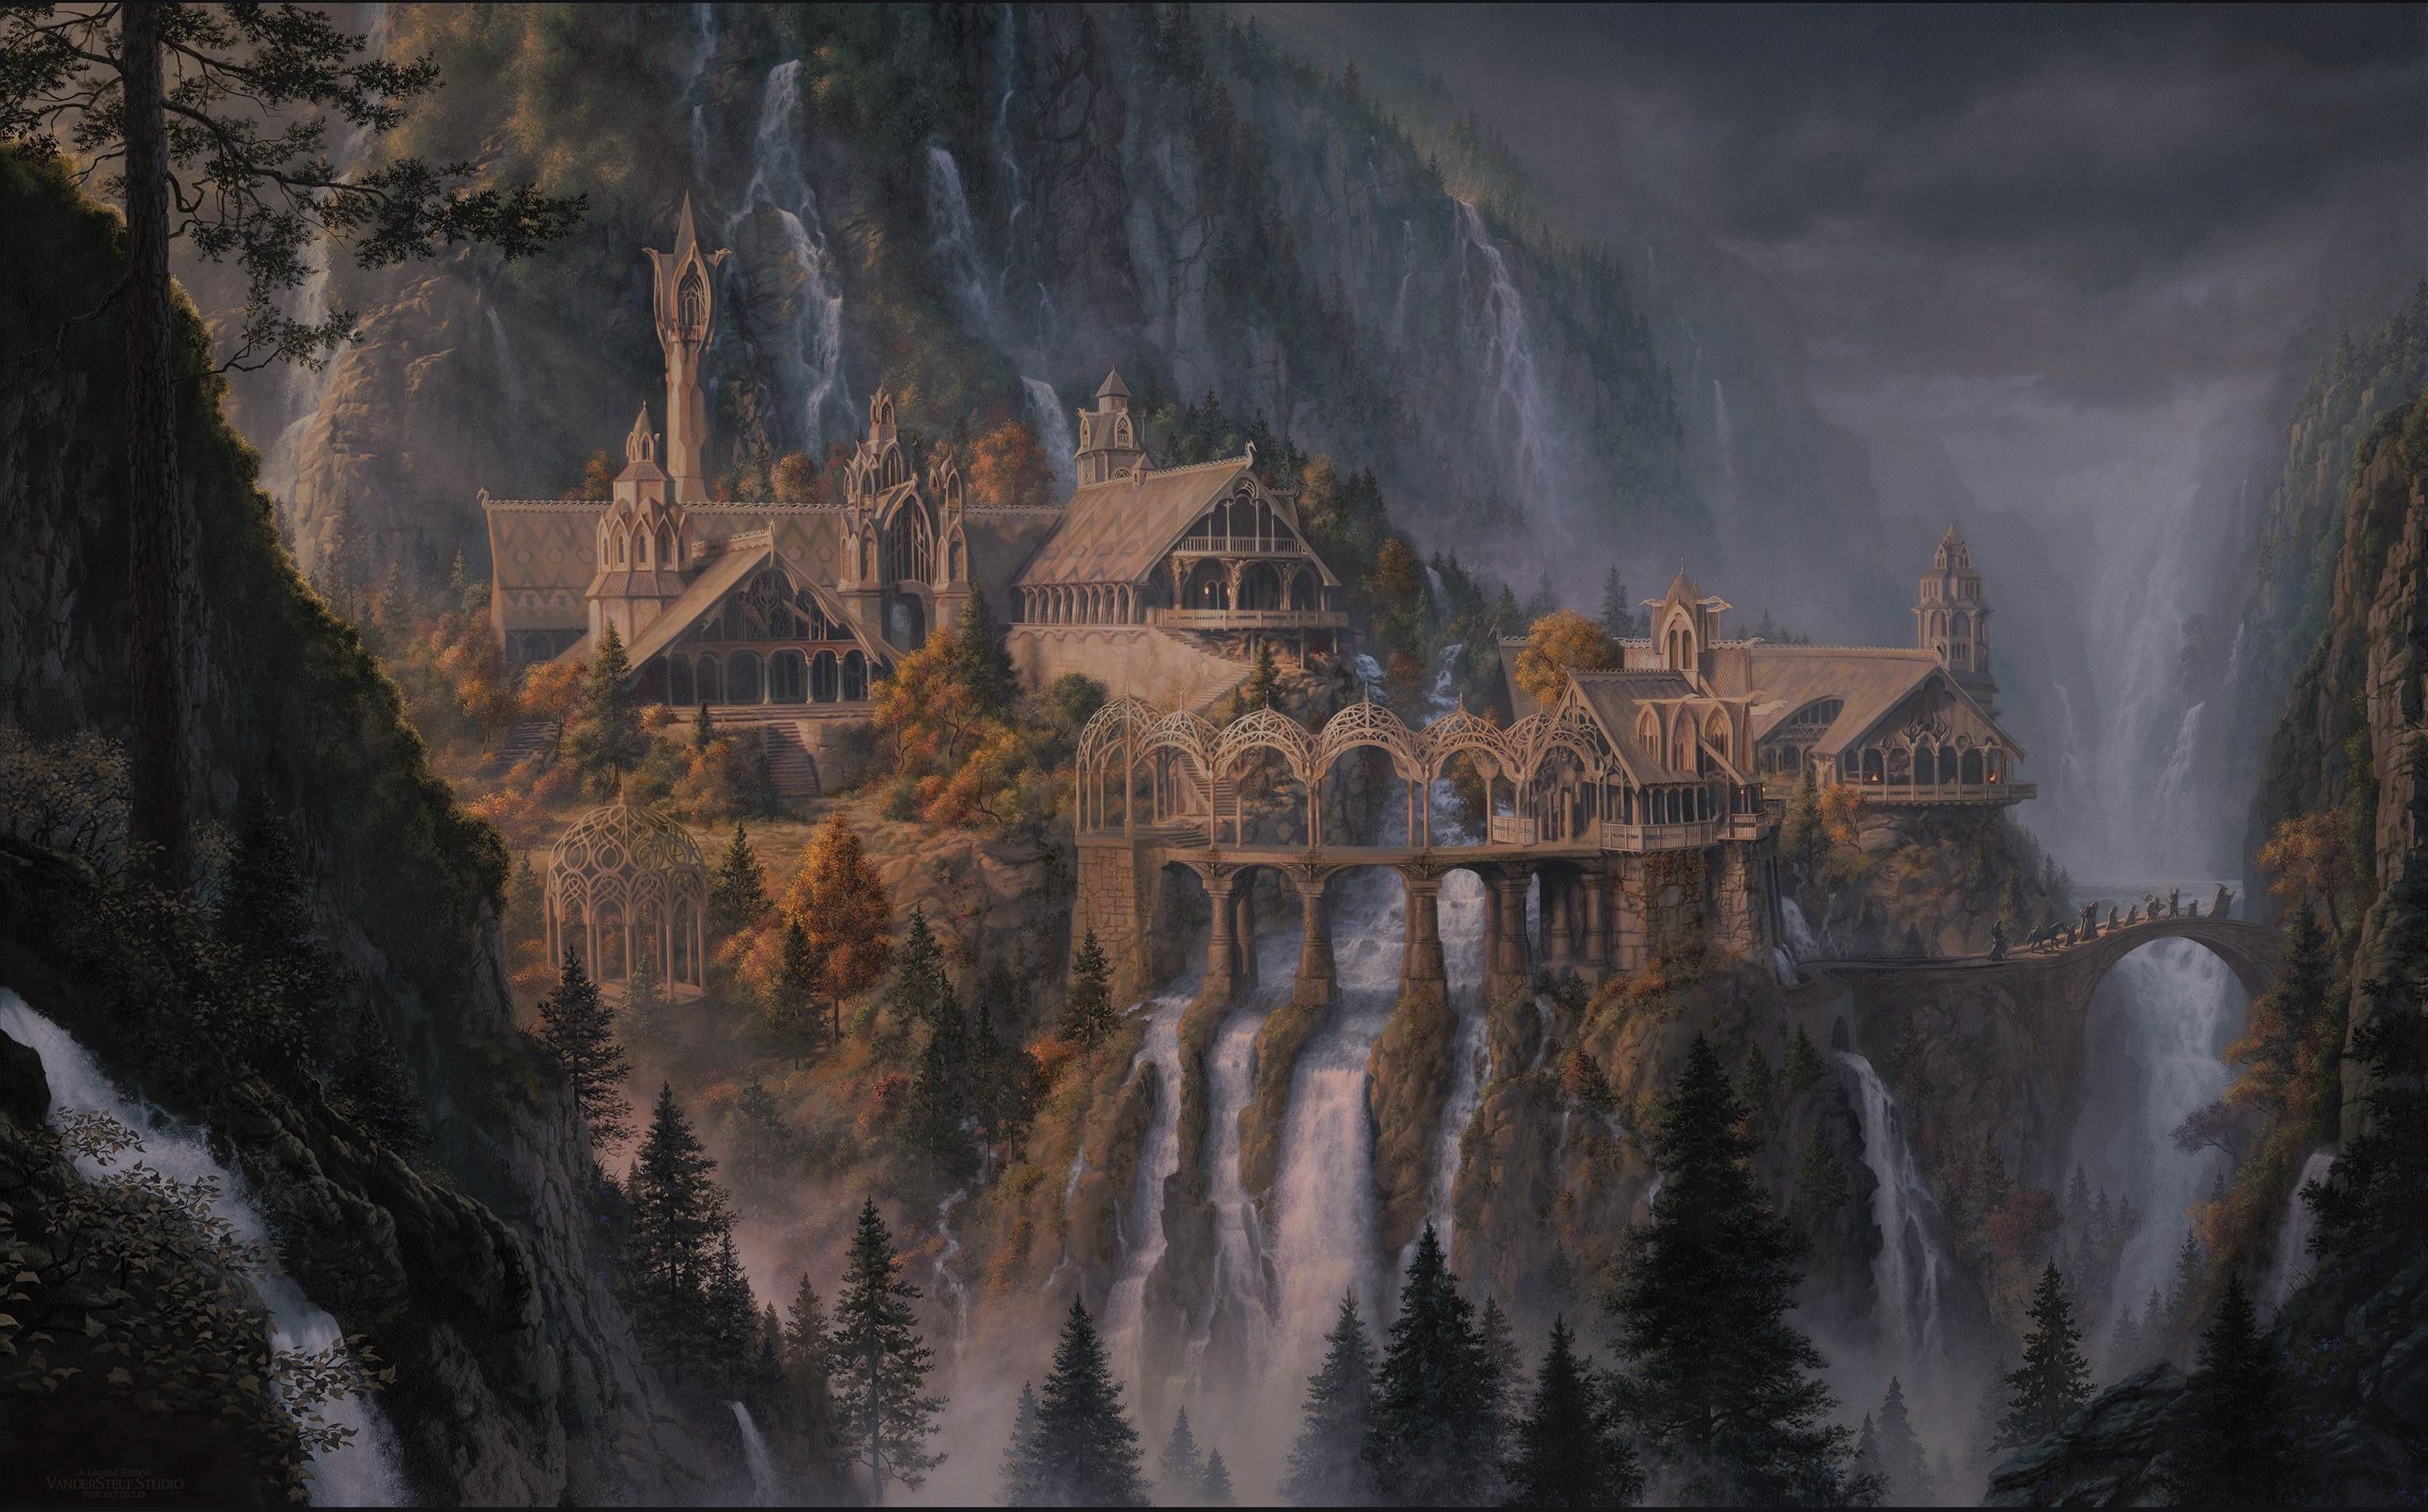 The house of Elrond in Rivandell by Alan Lee (1920 x 1080)